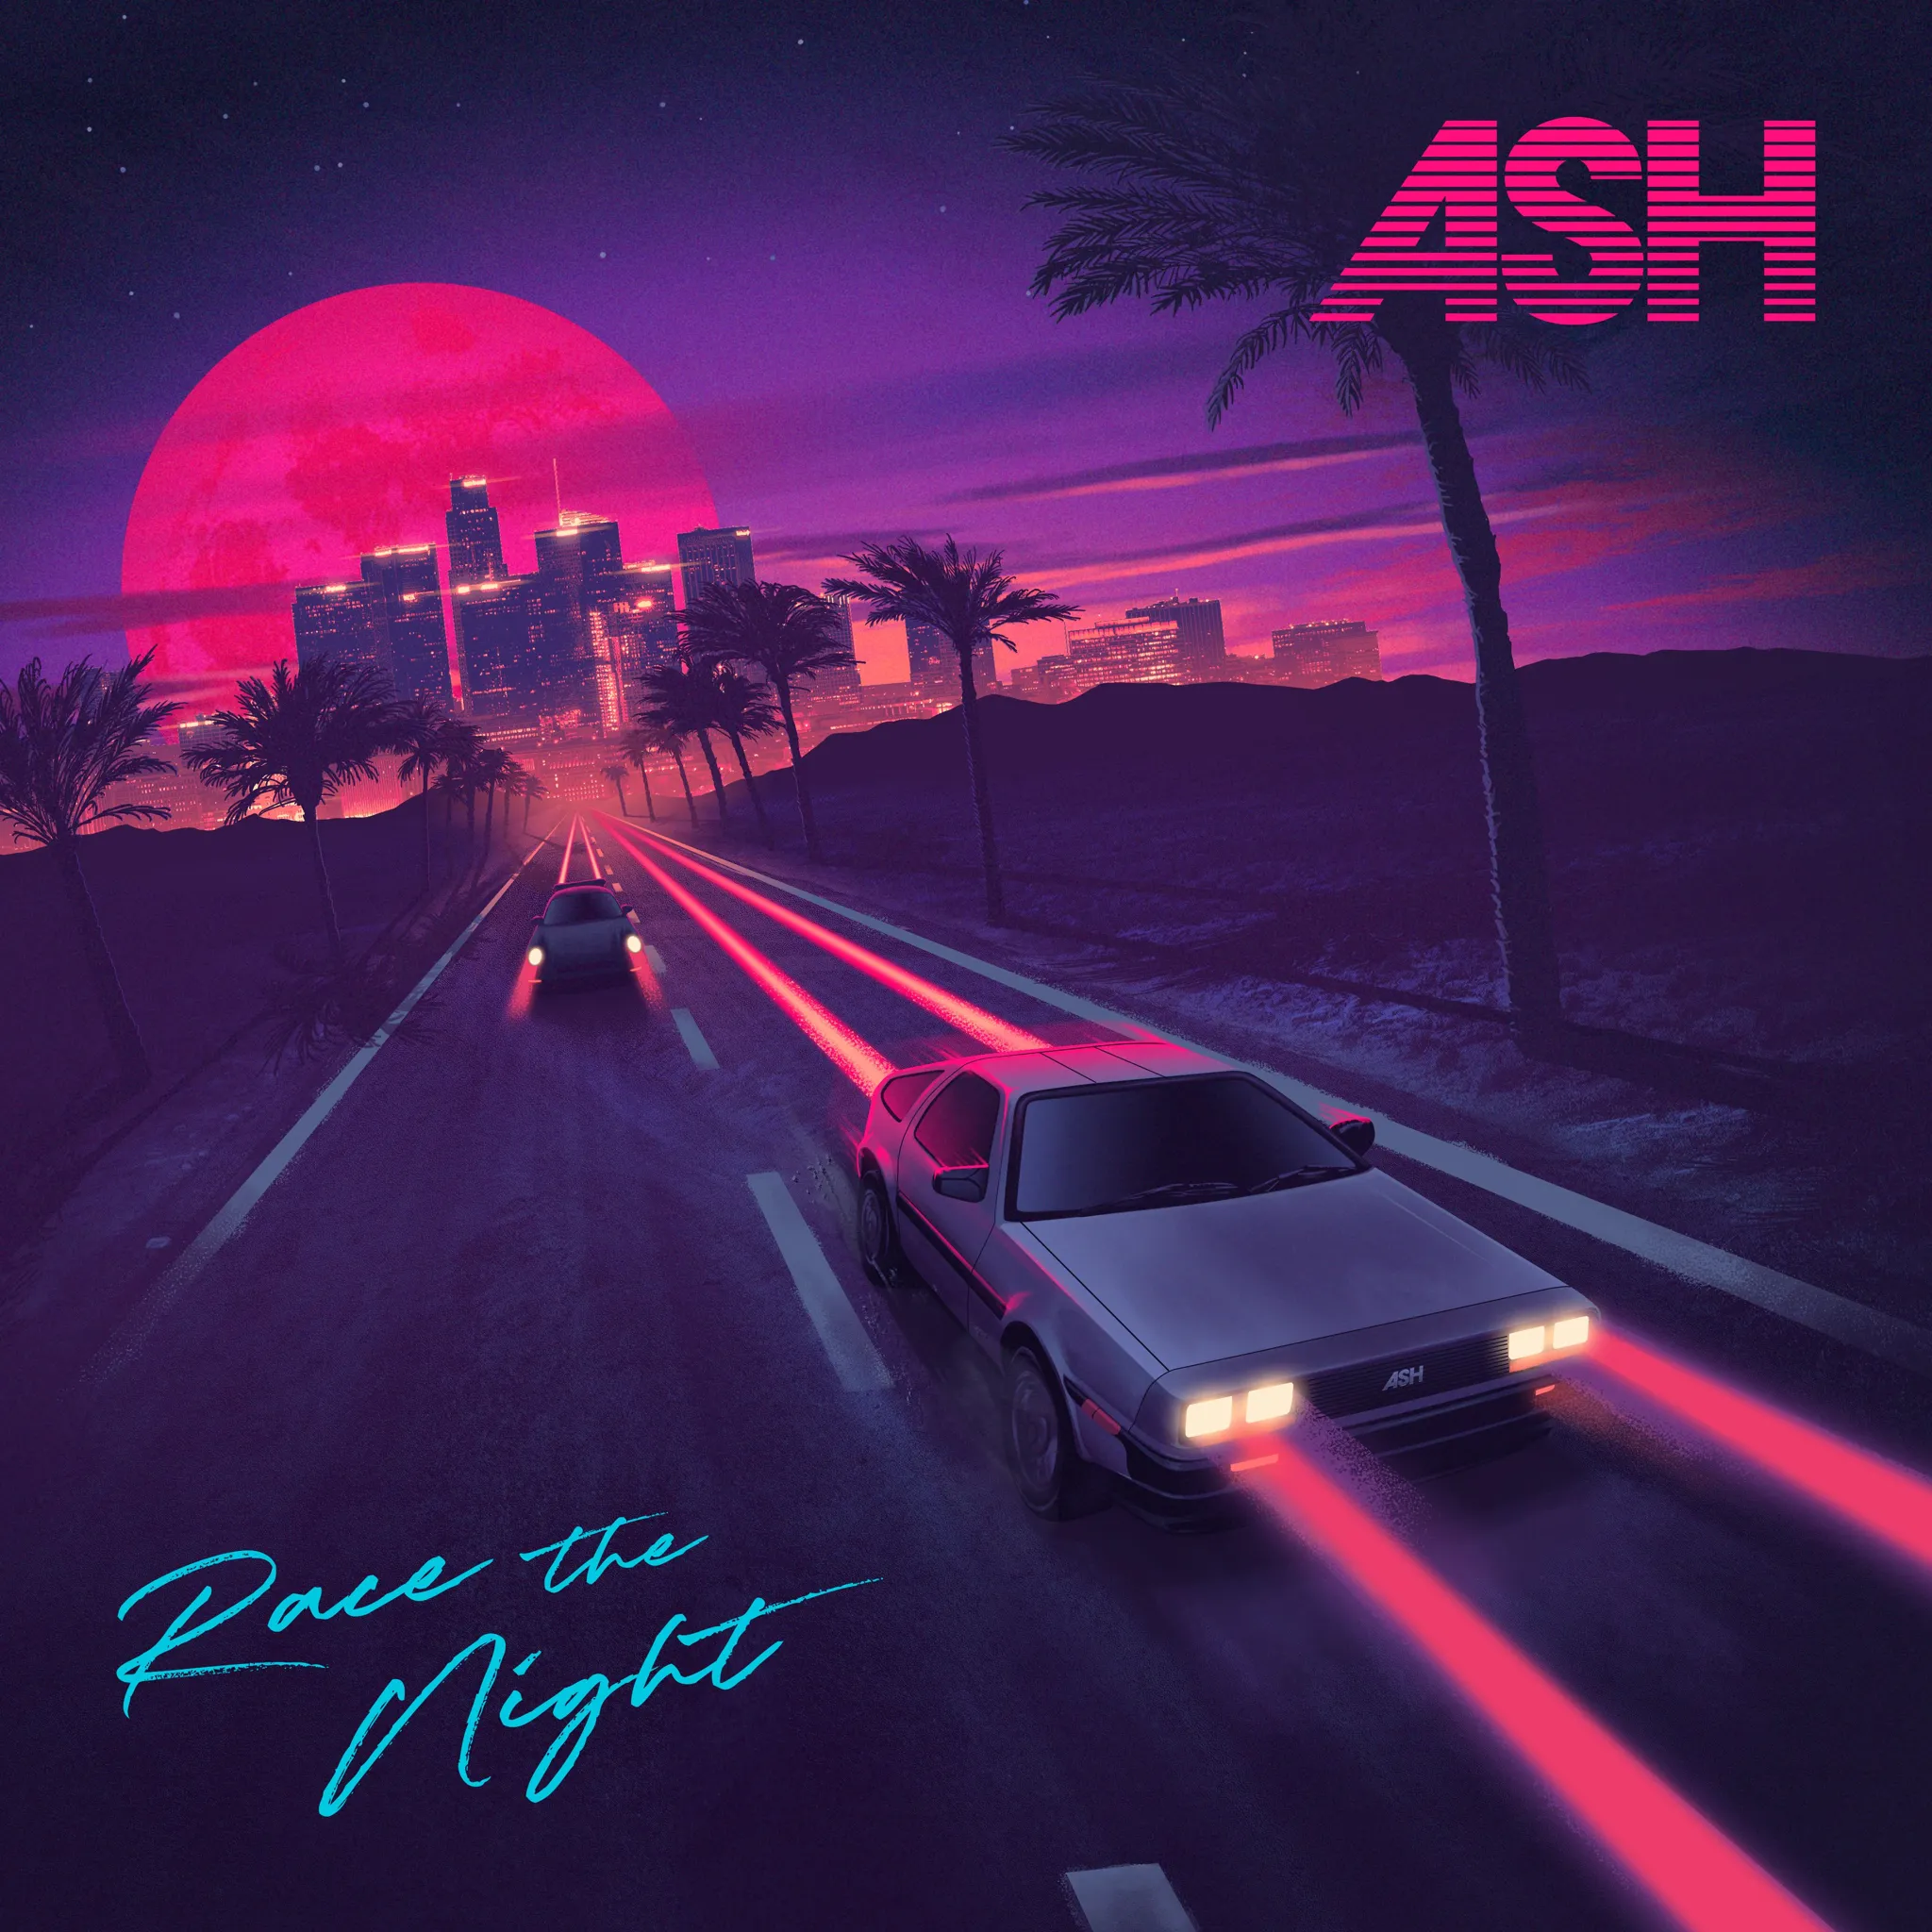 <strong>Ash - Race The Night</strong> (Vinyl LP - violet)